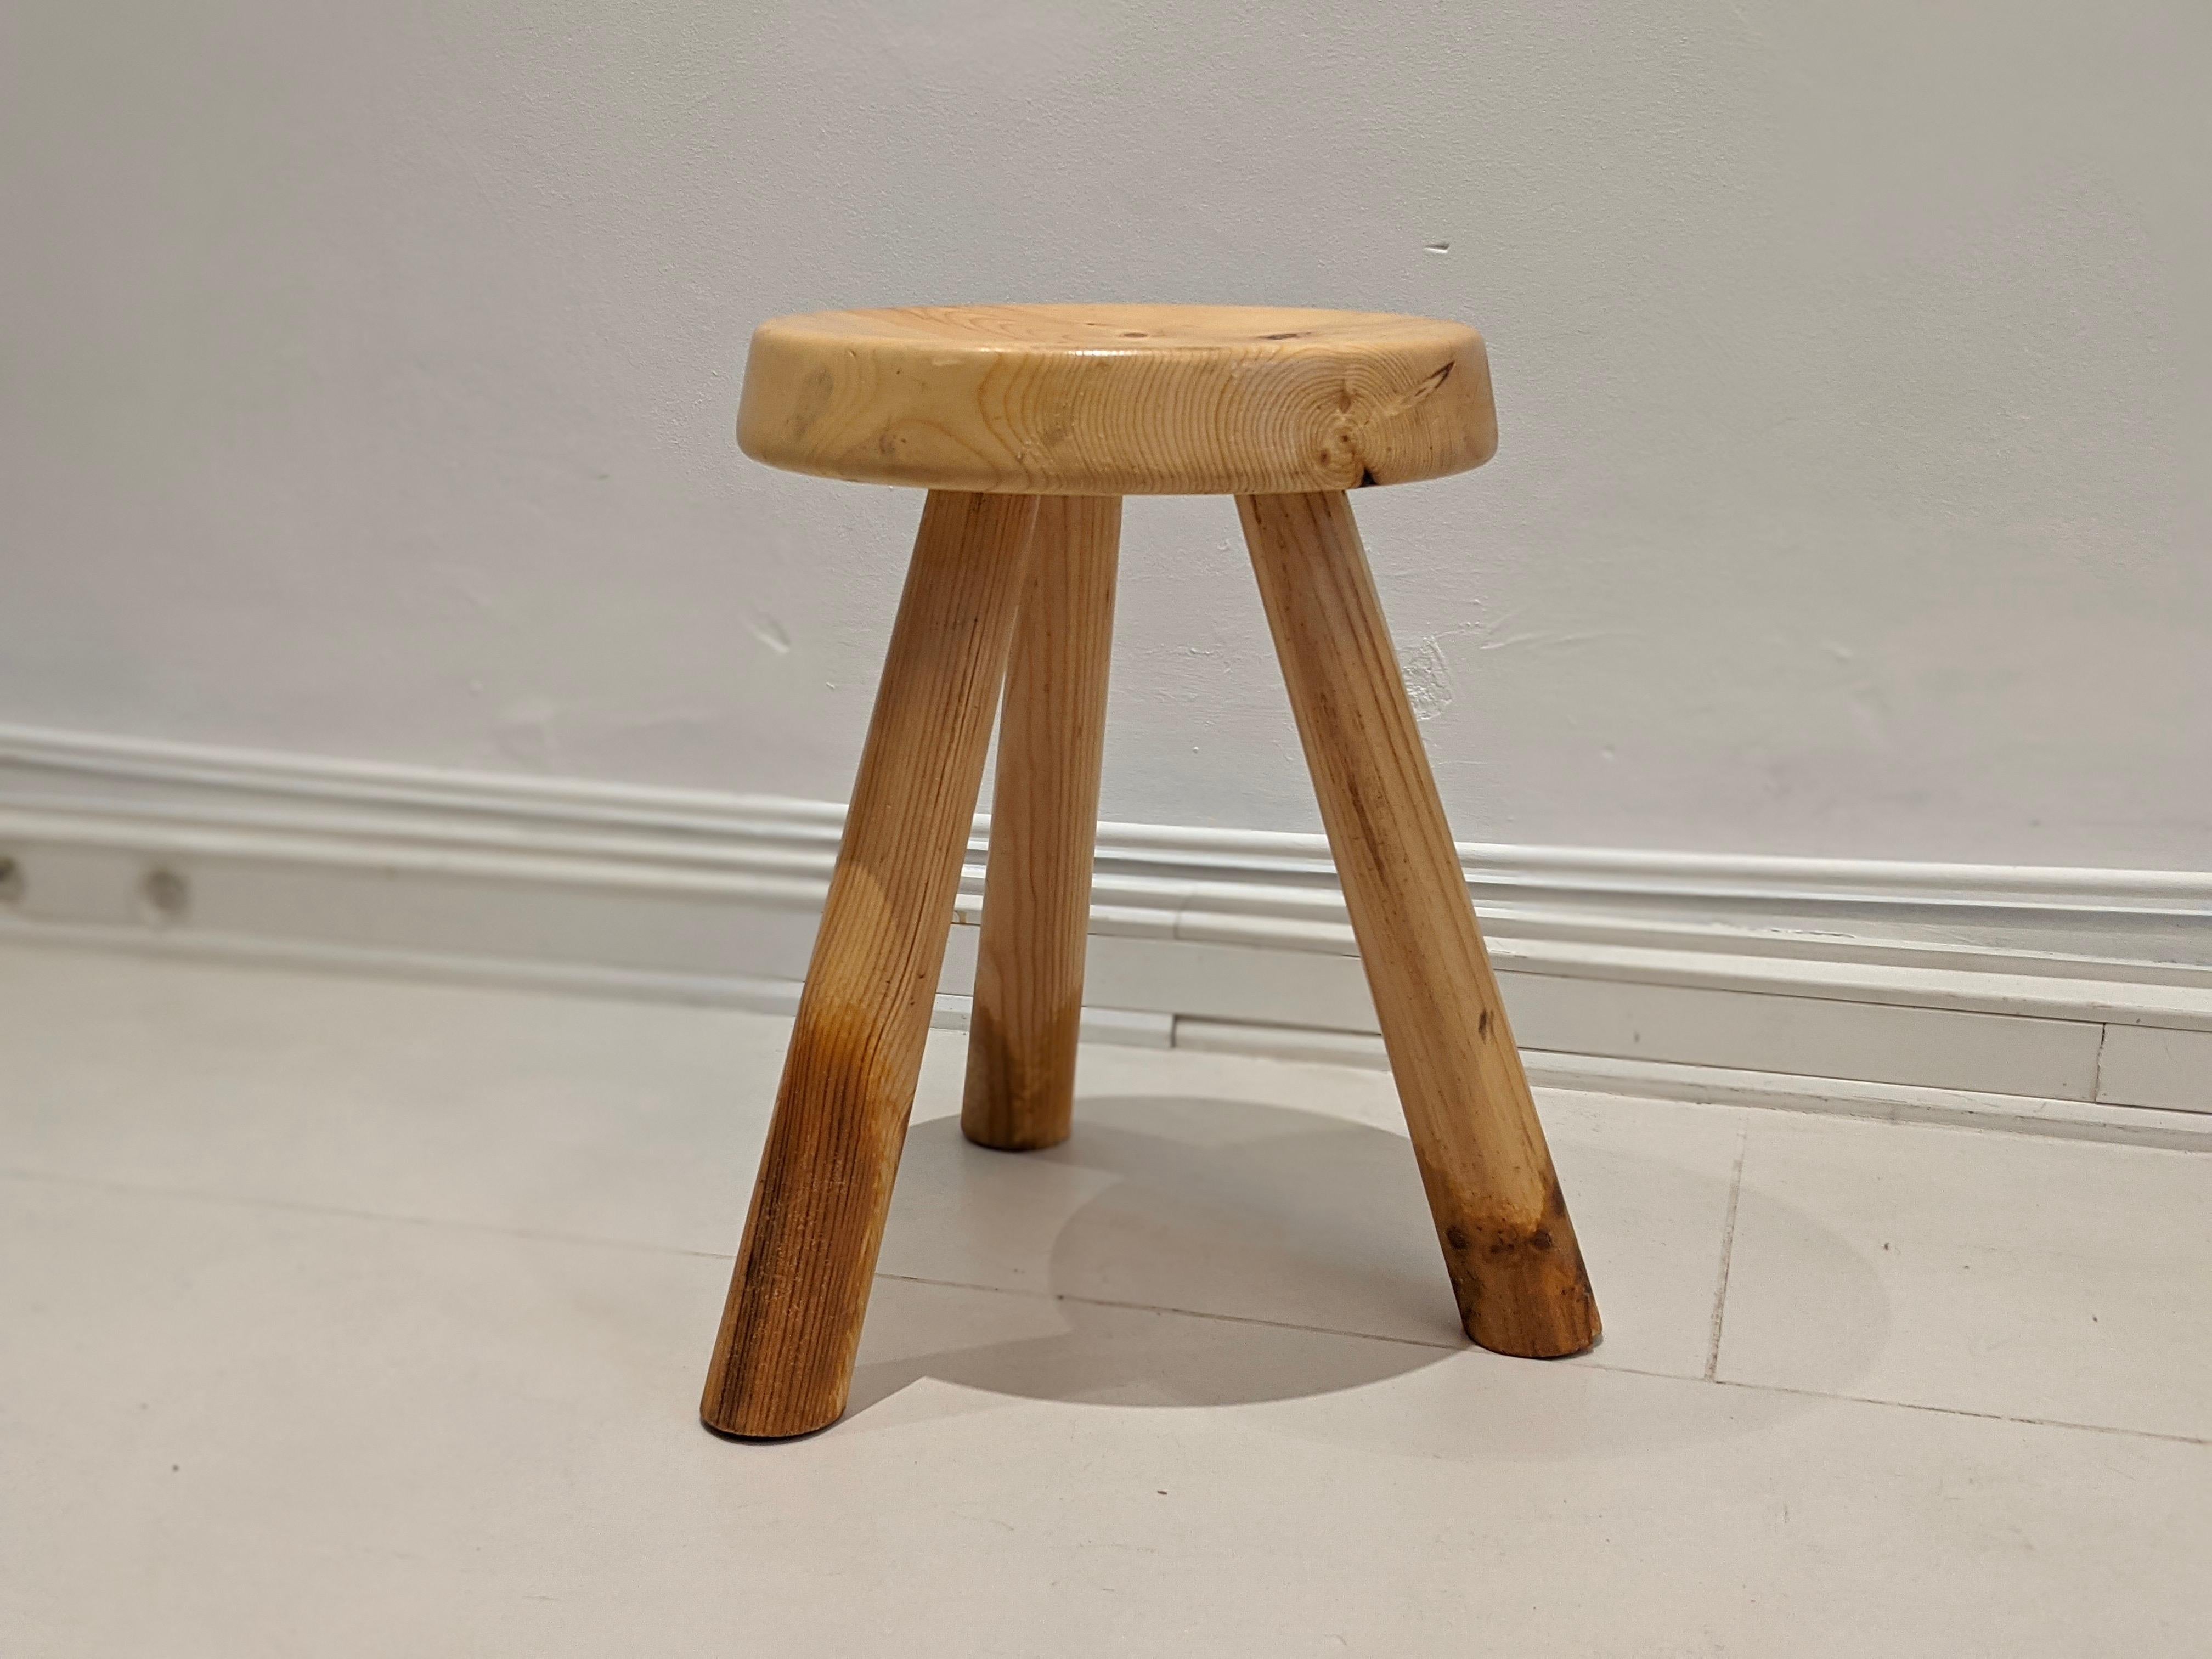 Low and tripod stool in pinewood by Charlotte Perriand for Les Arcs. Good condition, light signs of wear on the legs consistent with age and use.